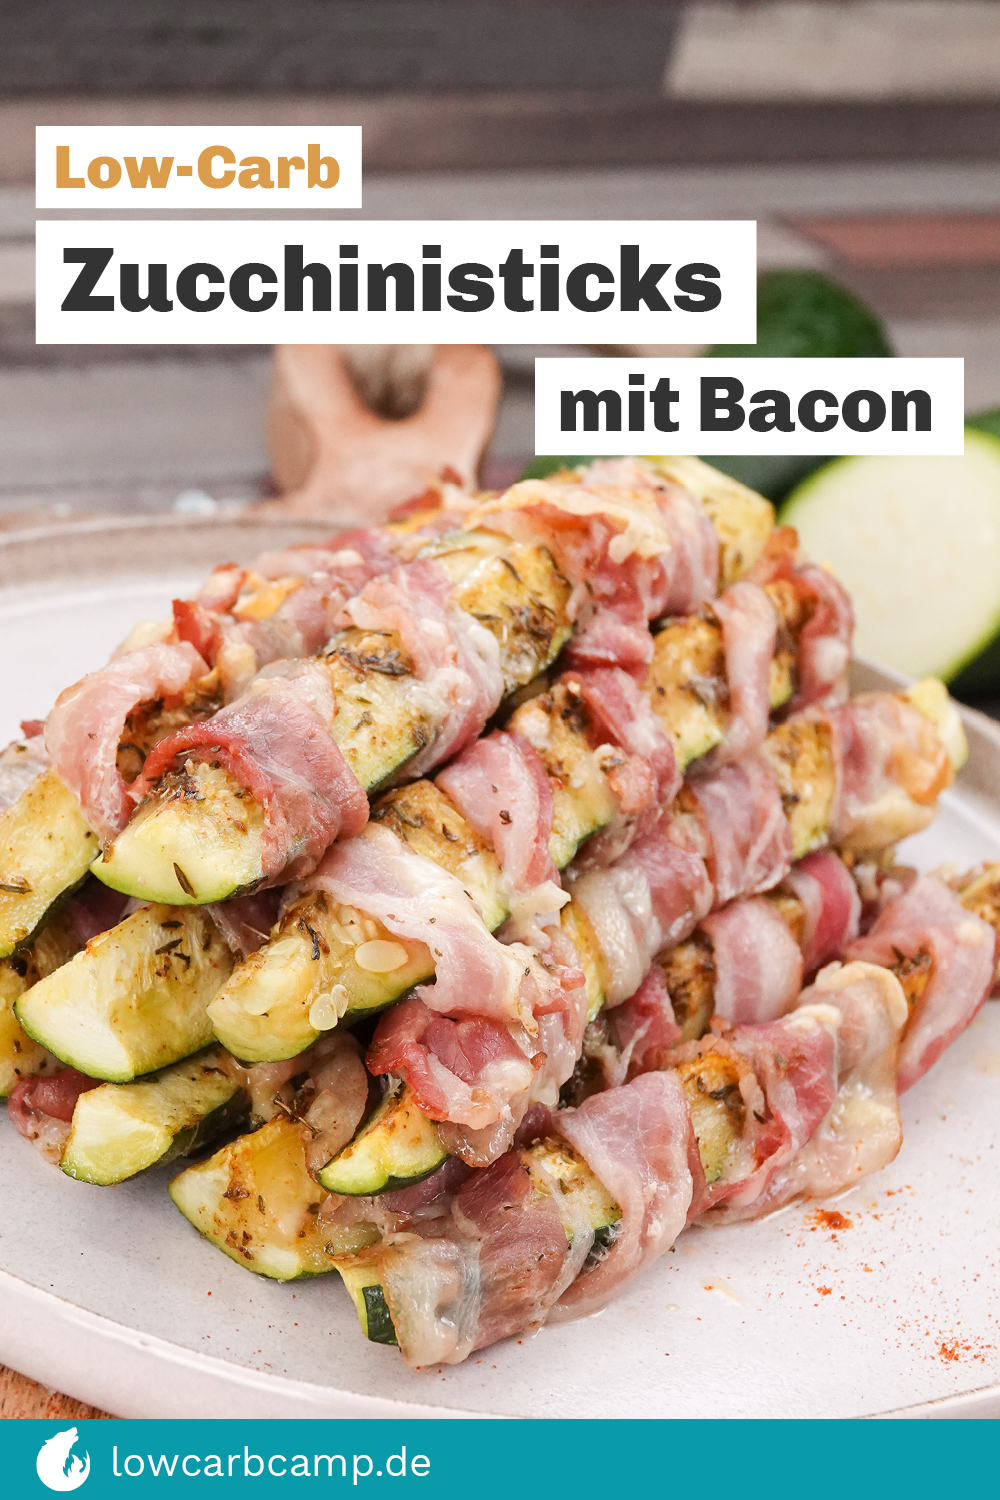 Low-Carb Zucchinisticks mit Bacon